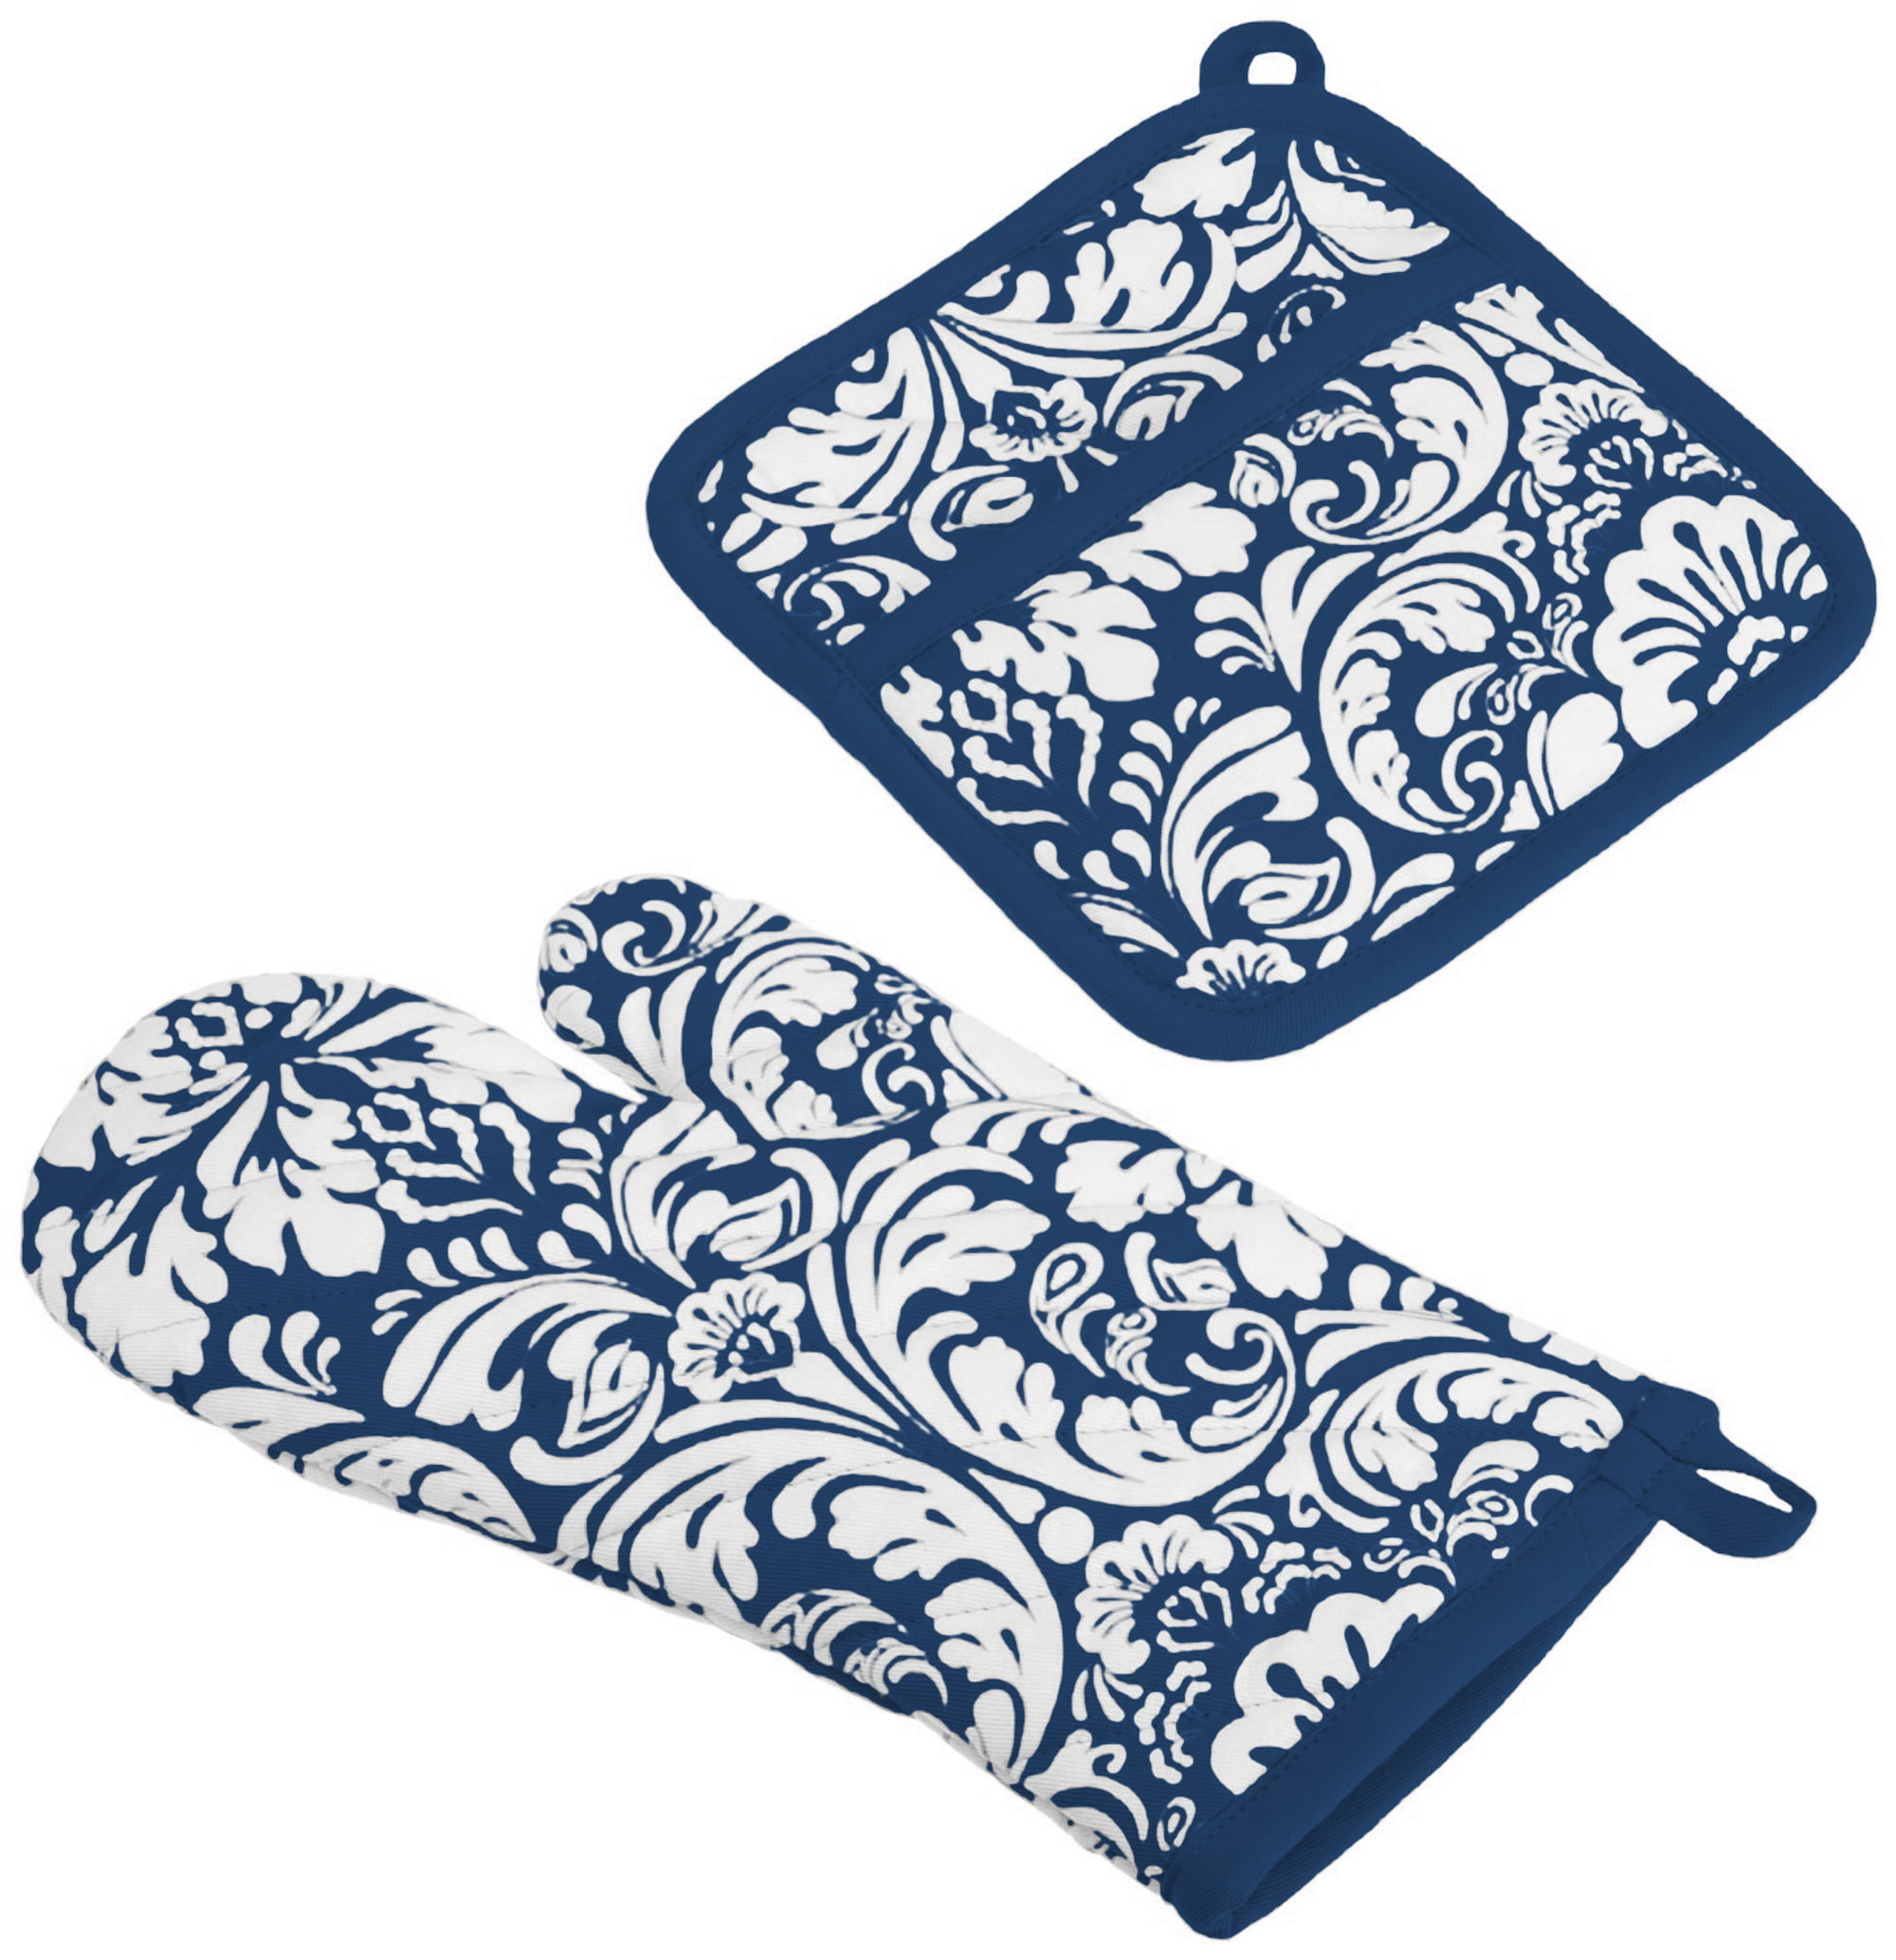 Coming Again Beautiful Rose Blue Cotton Quilted Oven Mitt Pot Glove 